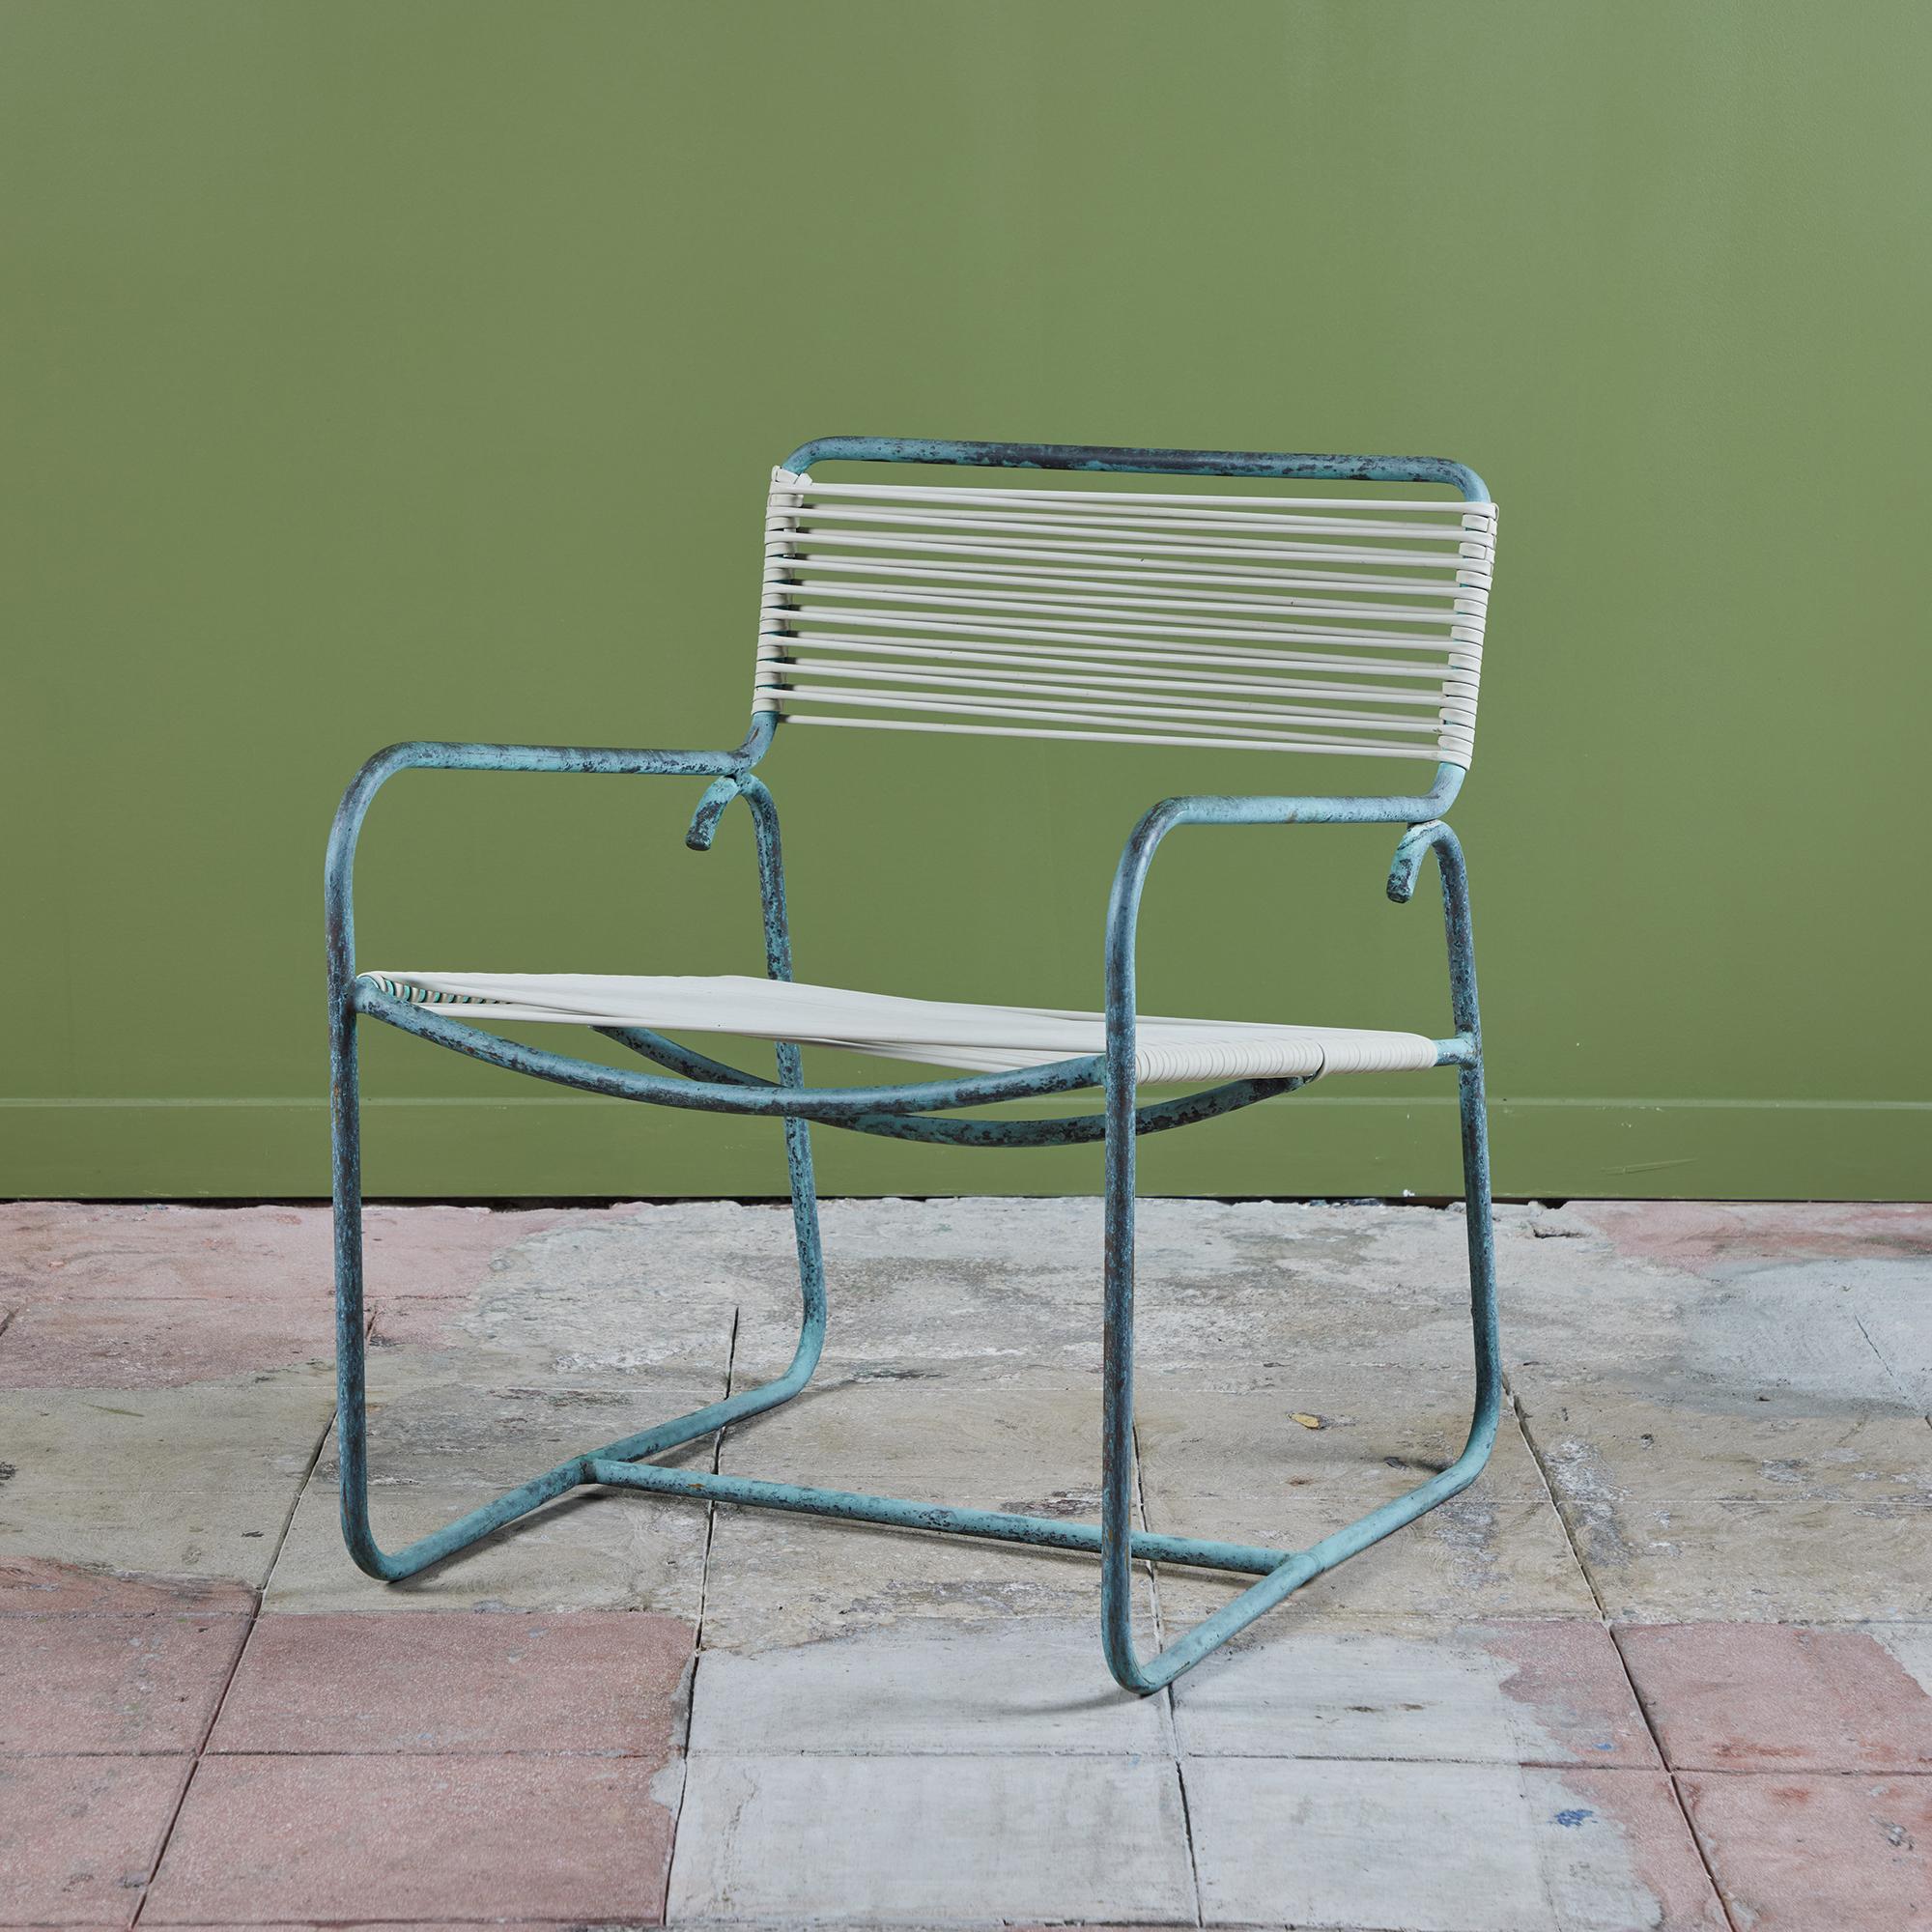 A wide patio lounge chair by Walter Lamb for Brown Jordan. The chair has a simple construction in tubular bronze with a patinated finish, with rounded squares serving as runners on each side. The backrest and seat are both original vinyl